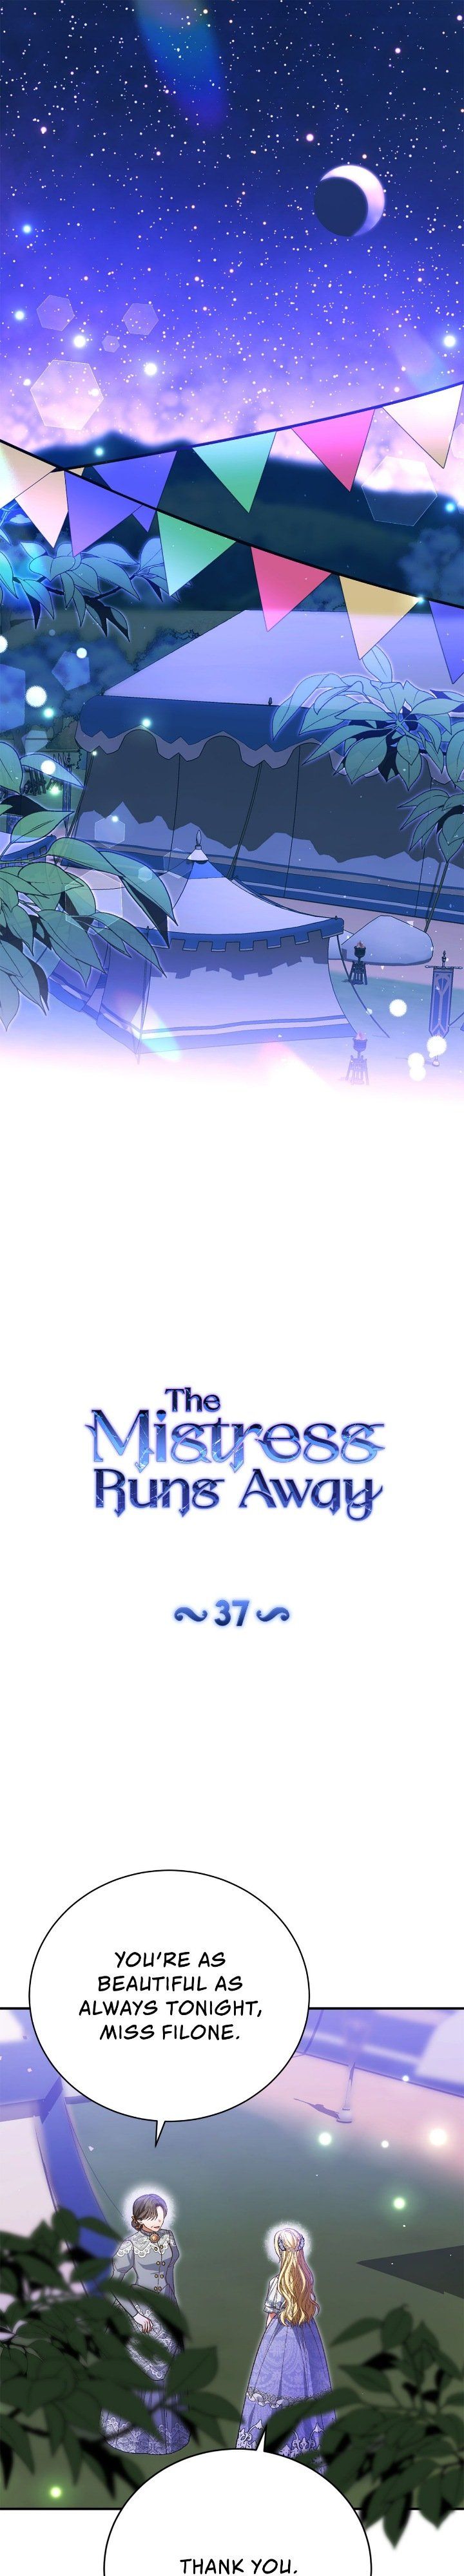 The Mistress Runs Away Chapter 37 page 1